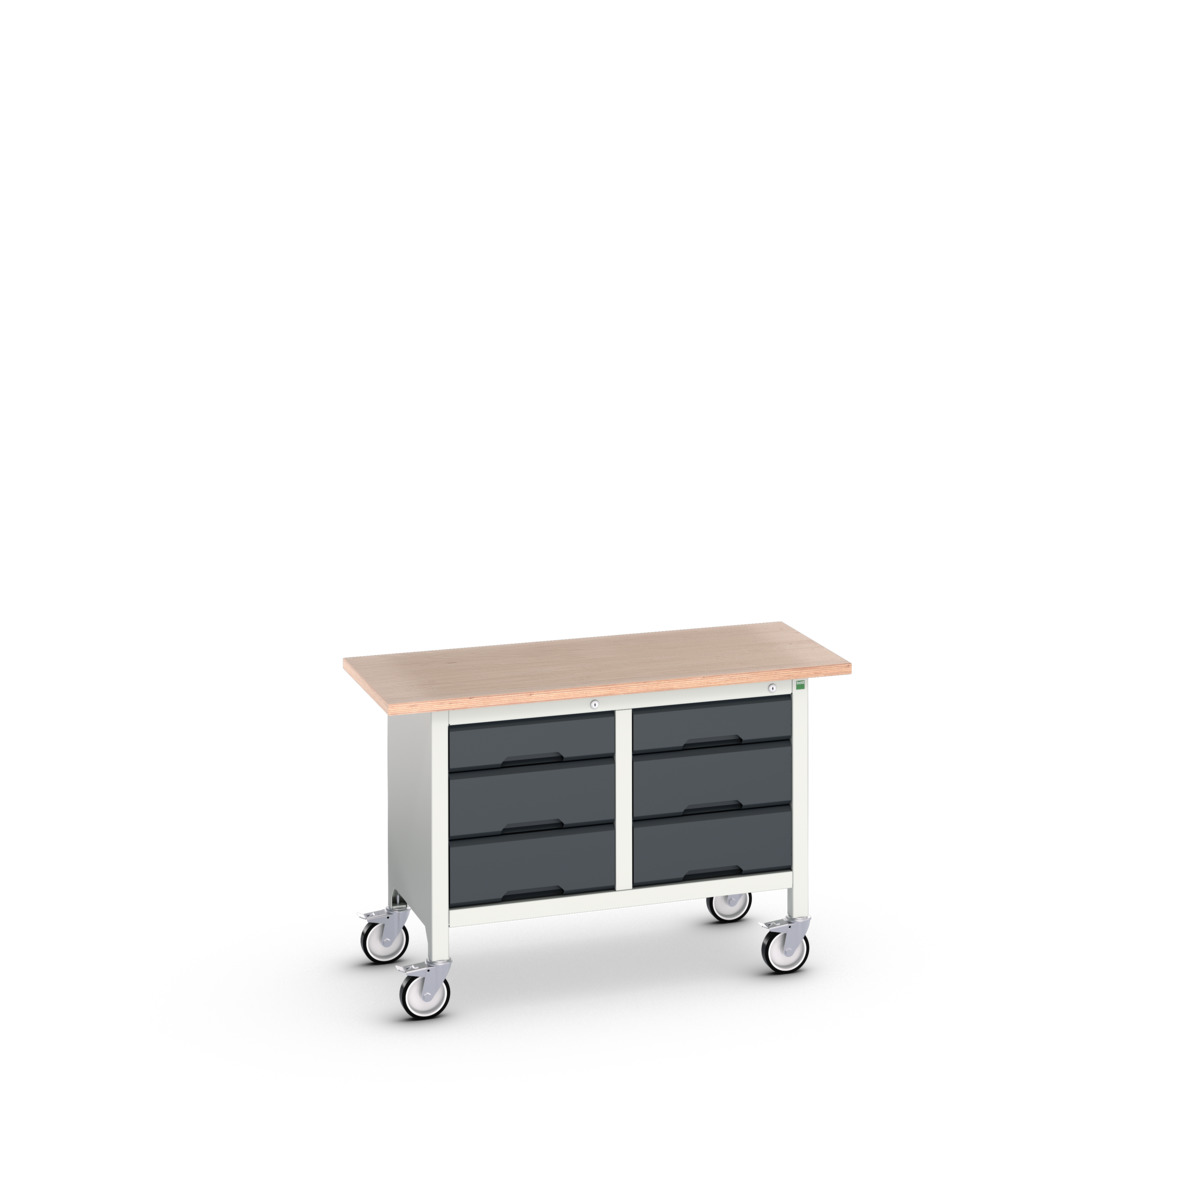 16923204.19 - verso mobile storage bench (mpx)